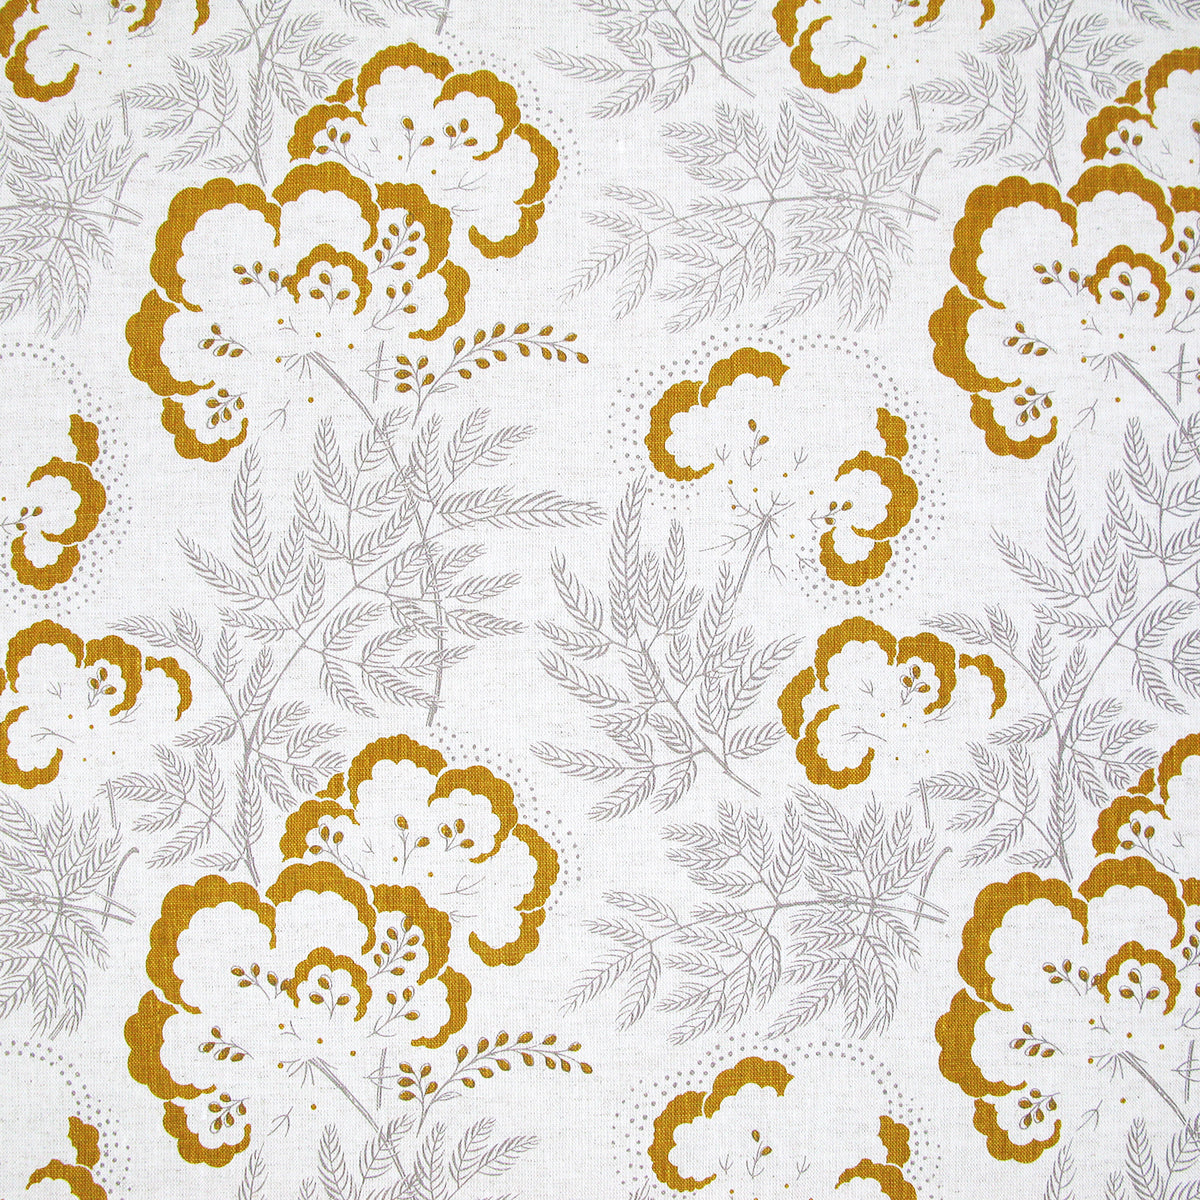 Detail of fabric in an intricate floral print in mustard and gray on a white field.